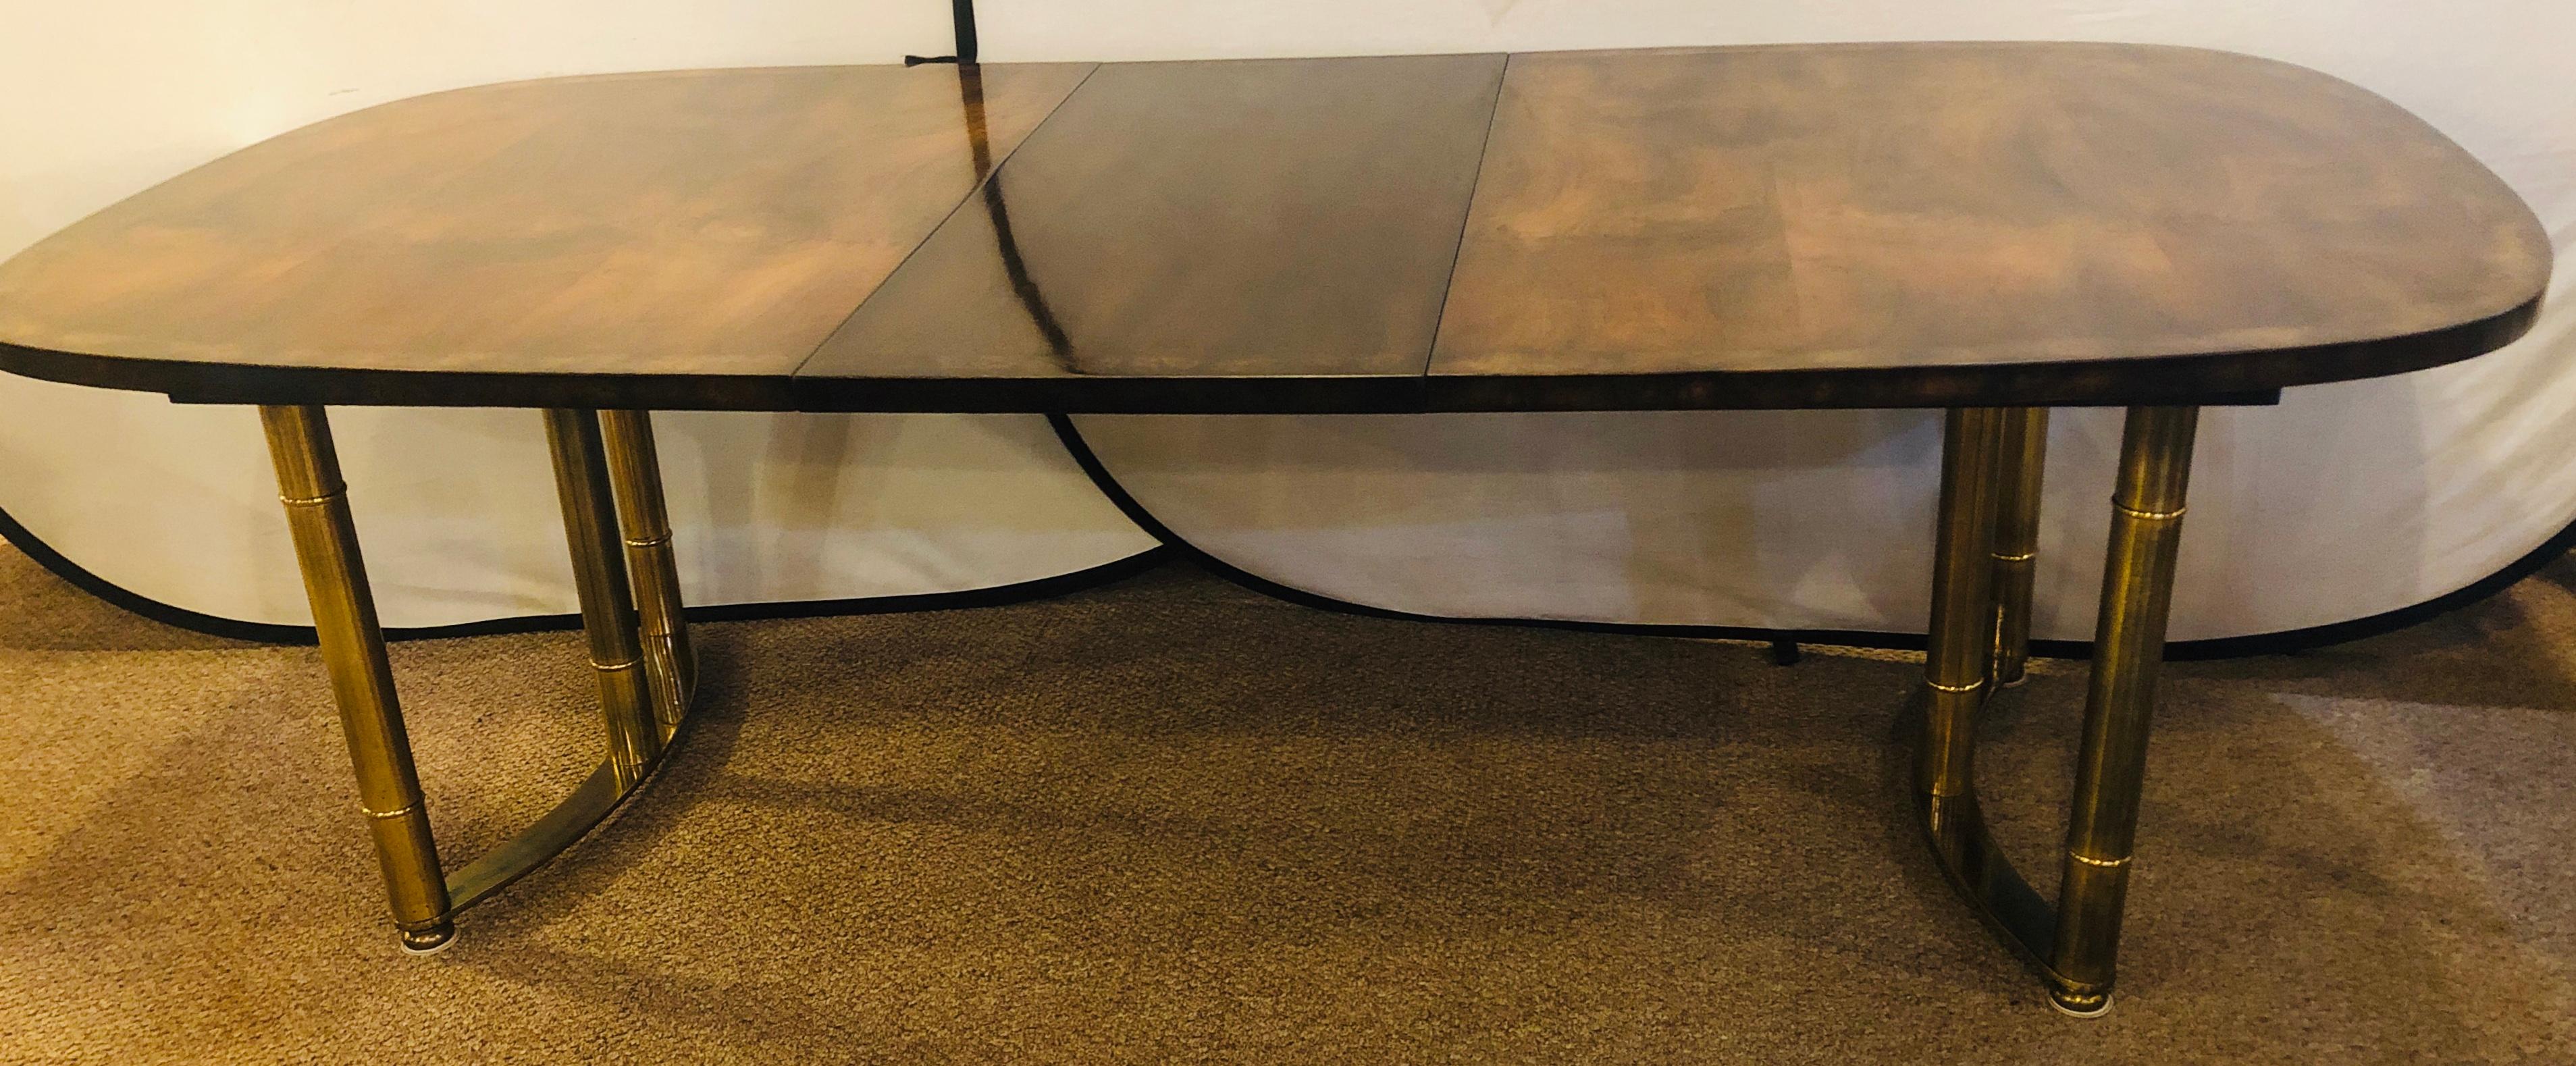 20th Century Mid-Century Modern Master-Craft Bamboo Brass and Burl Dining Room Table